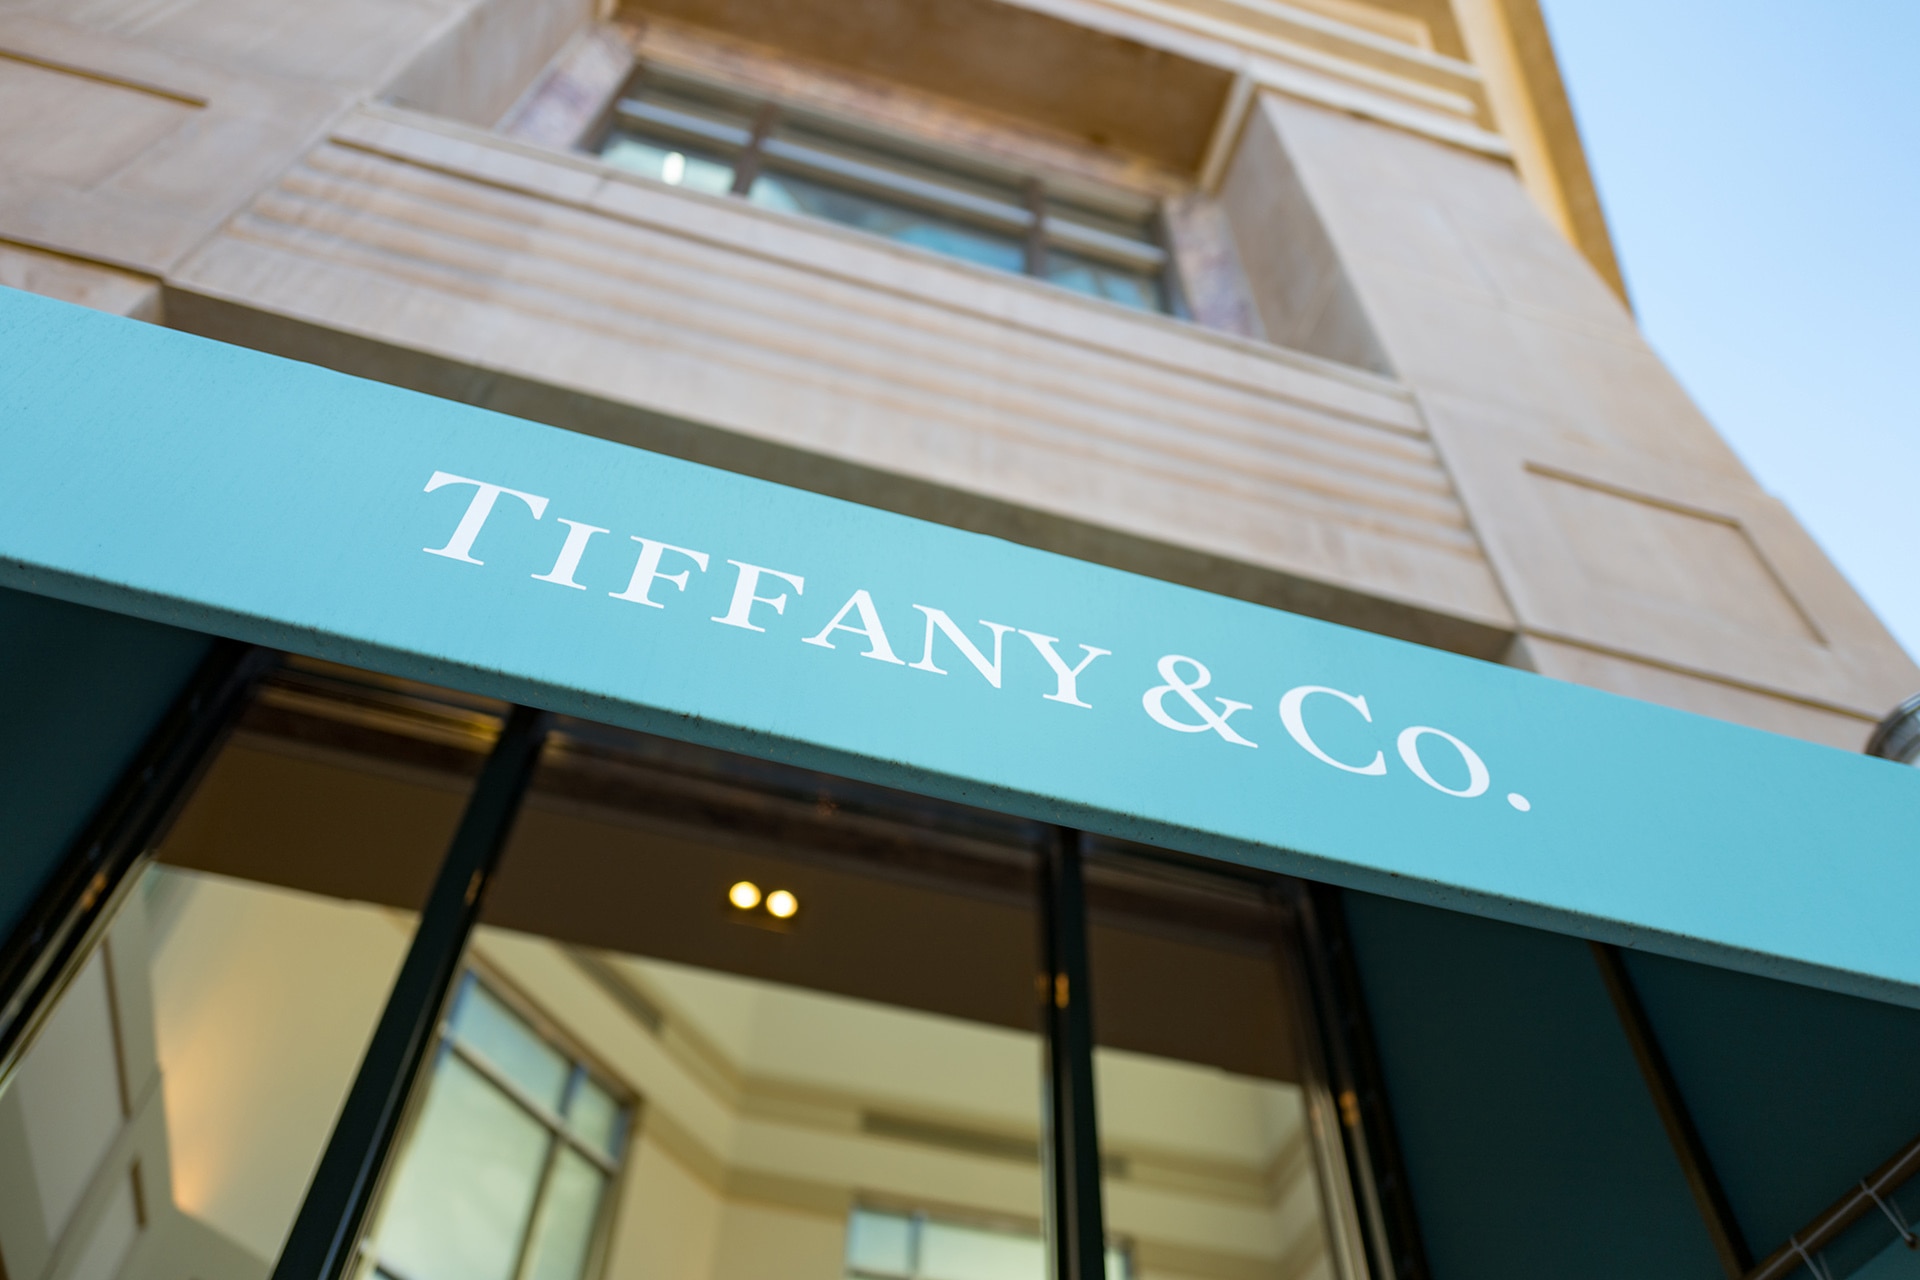 LVMH Acquires Tiffany, Makes Staffing Changes